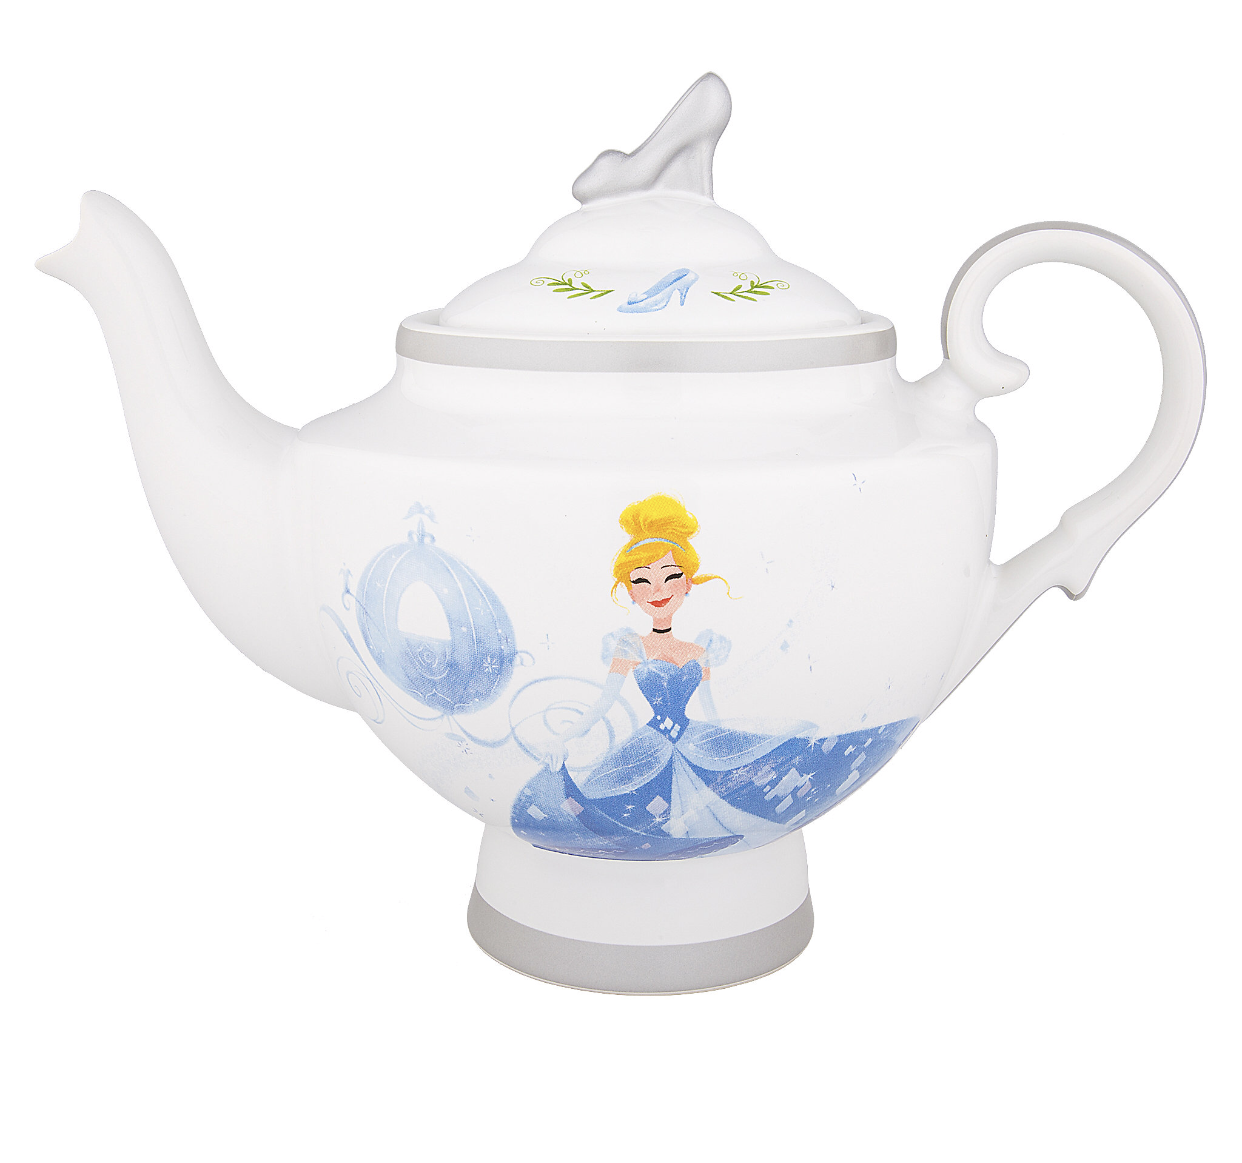 Disney Parks Cinderella Teapot Ceramic Slipper Carriage New With Tags